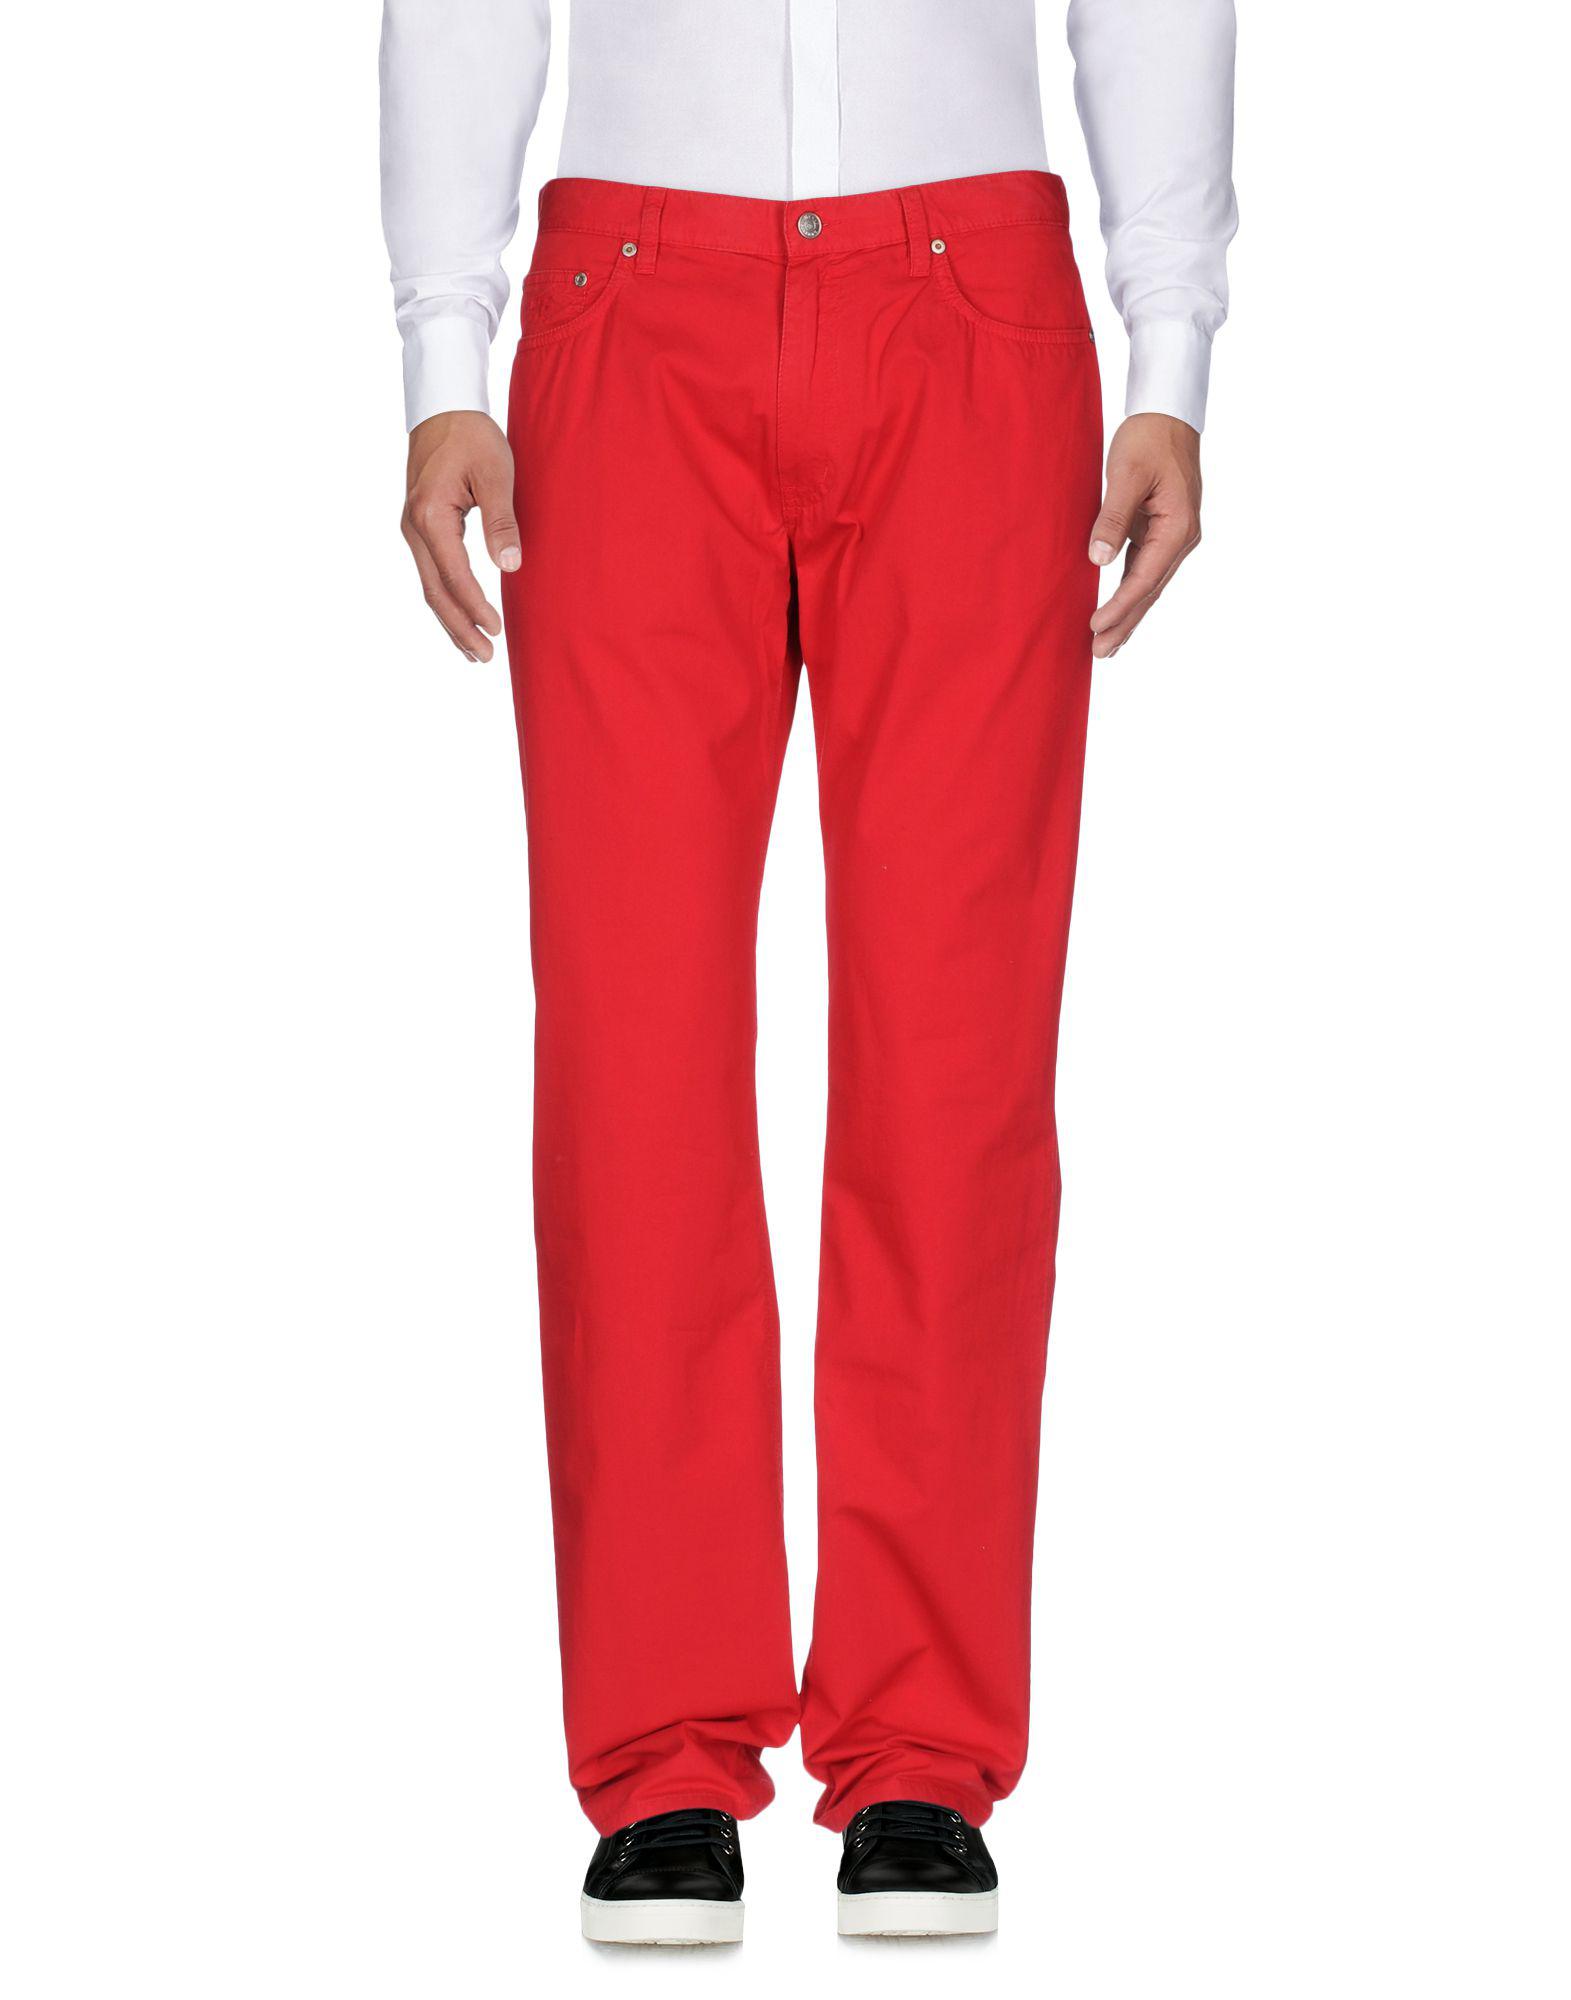 Henry Cotton's Leather Casual Pants in Red for Men - Lyst